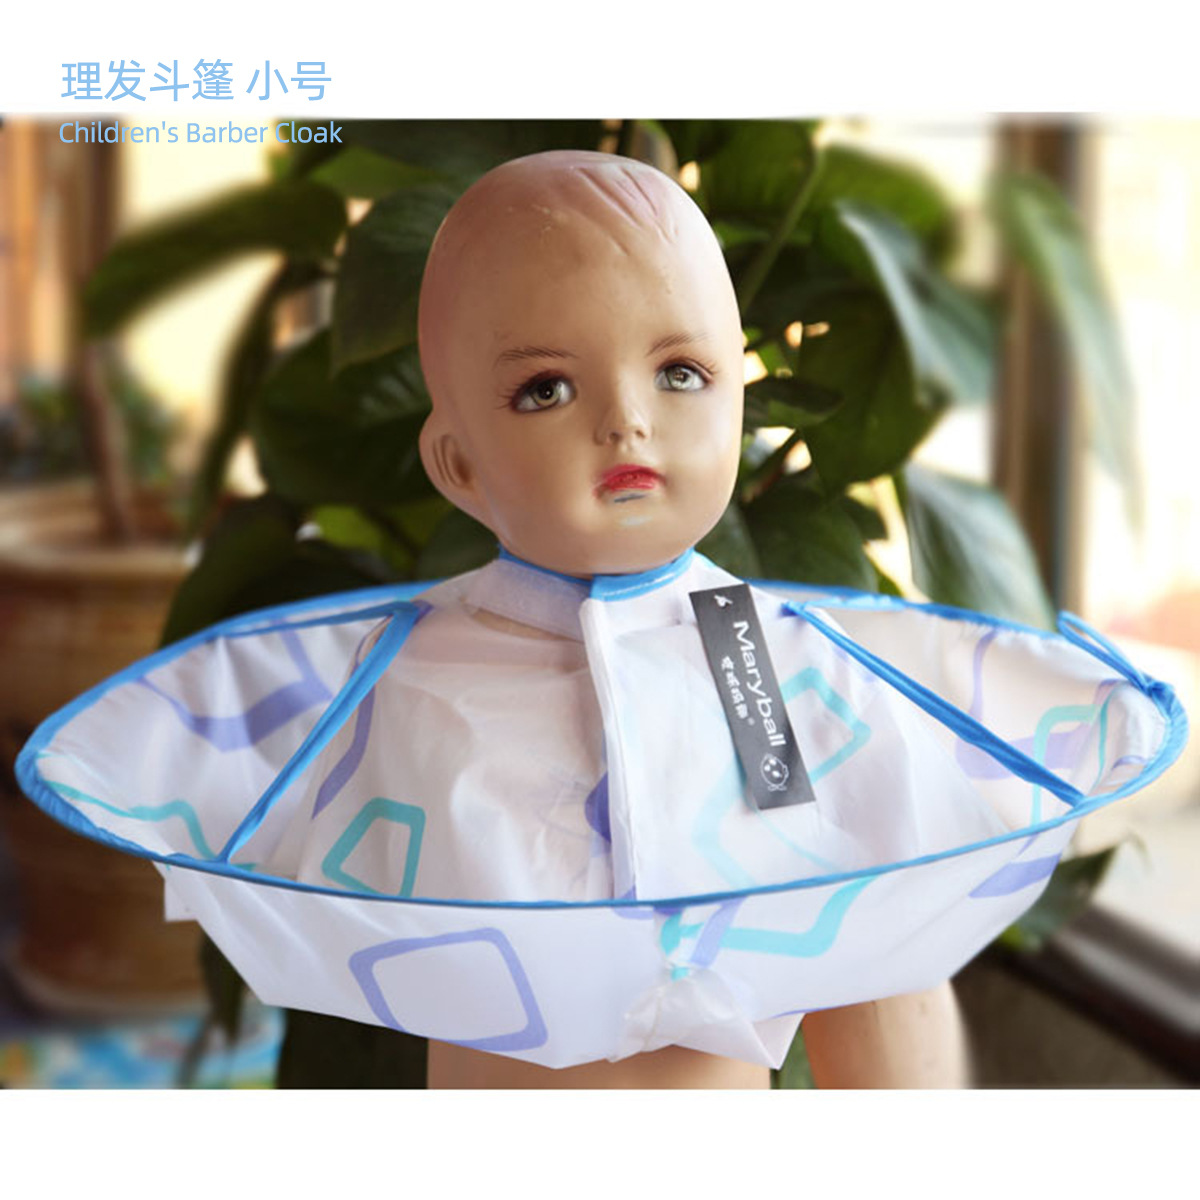 Factory Direct Sales Medium Color Haircut Cloak Children's Hair Cutting Suitable for Easy Cleaning without Dirt Children's Haircut